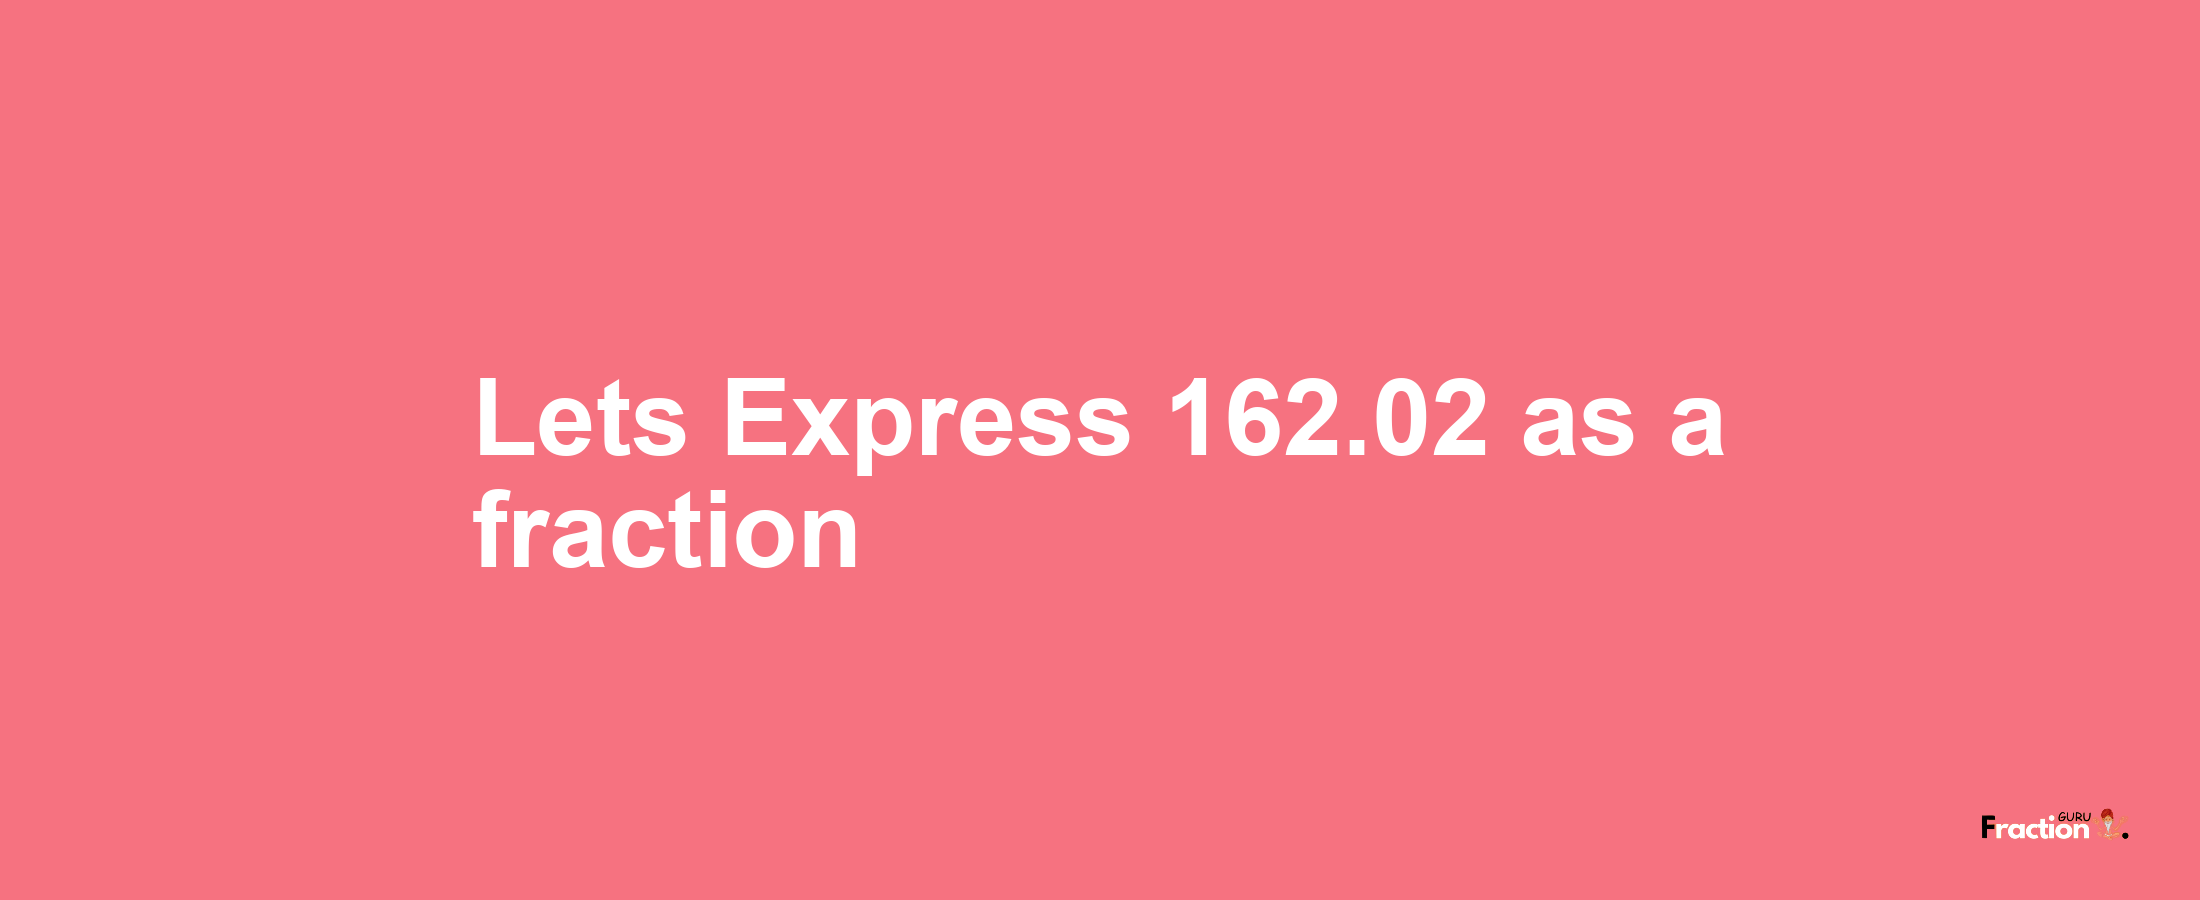 Lets Express 162.02 as afraction